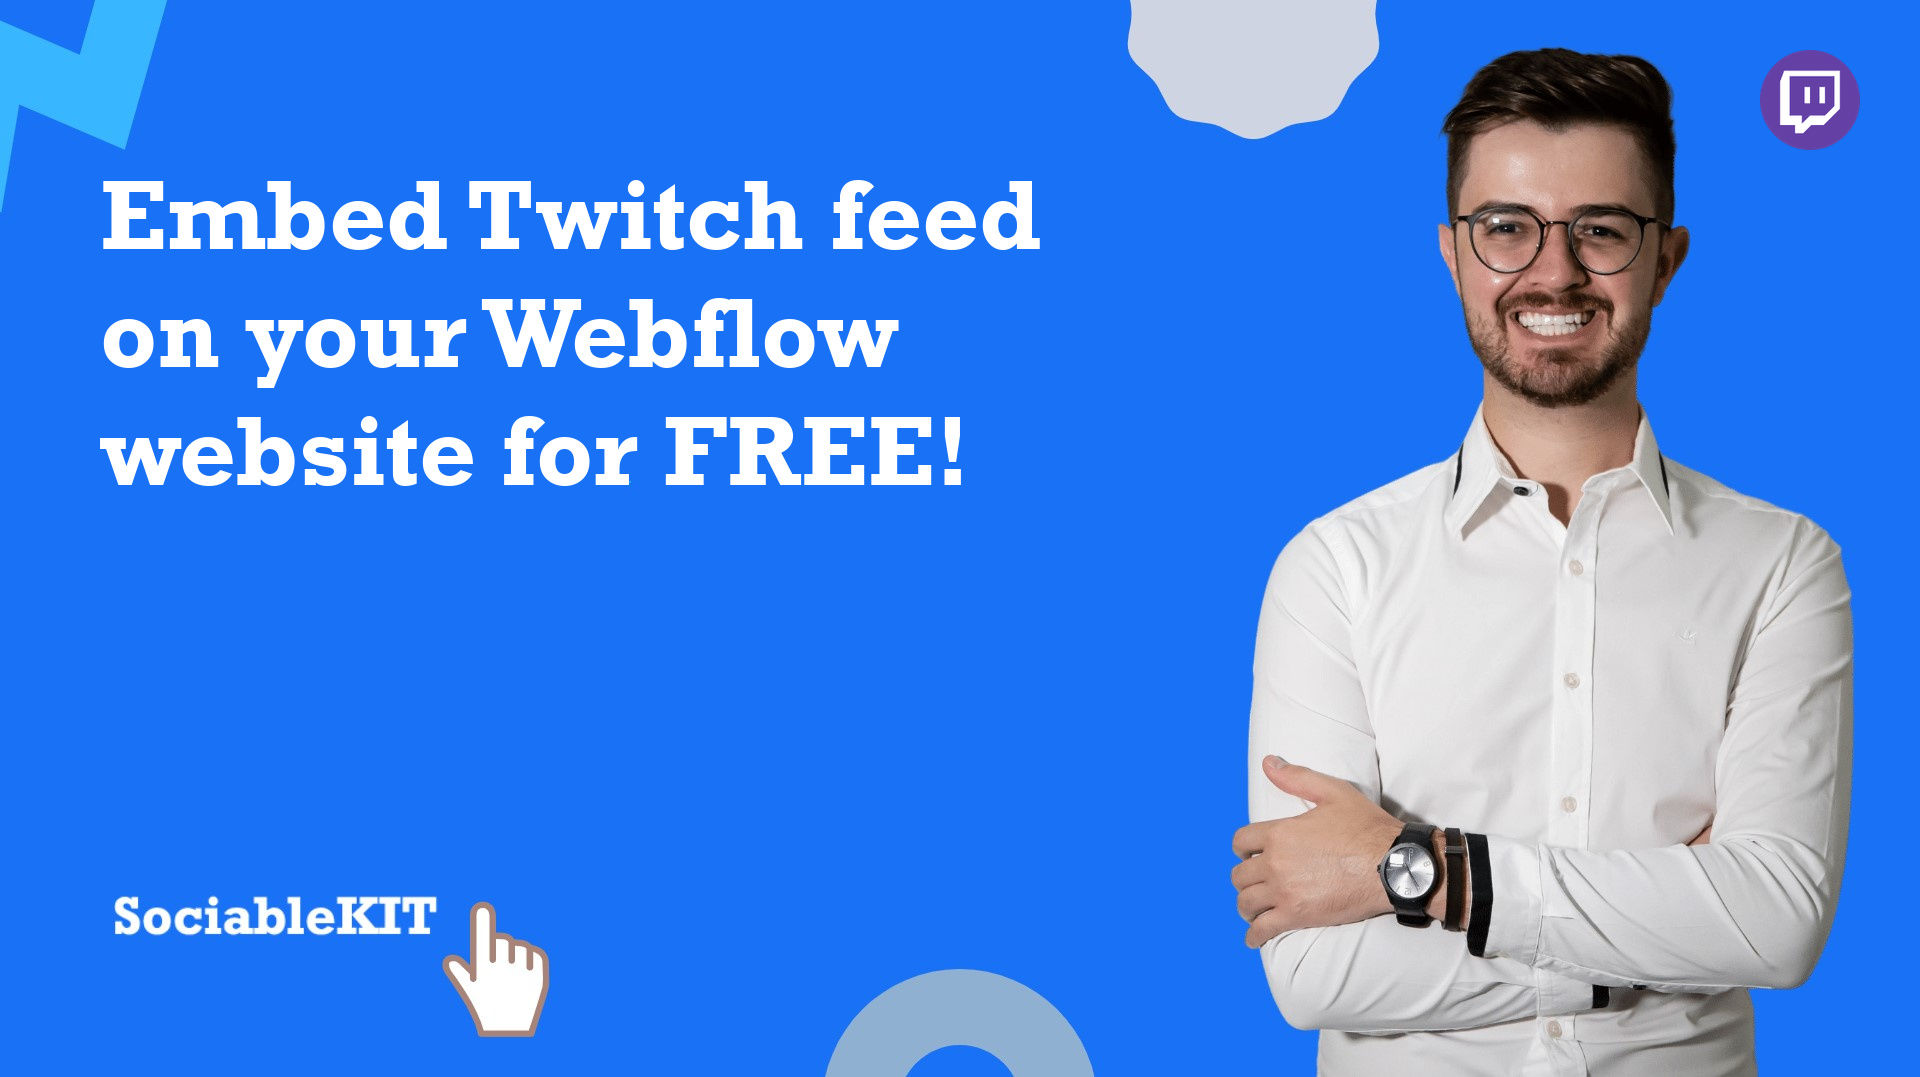 How to embed Twitch feed on your Webflow website for FREE?